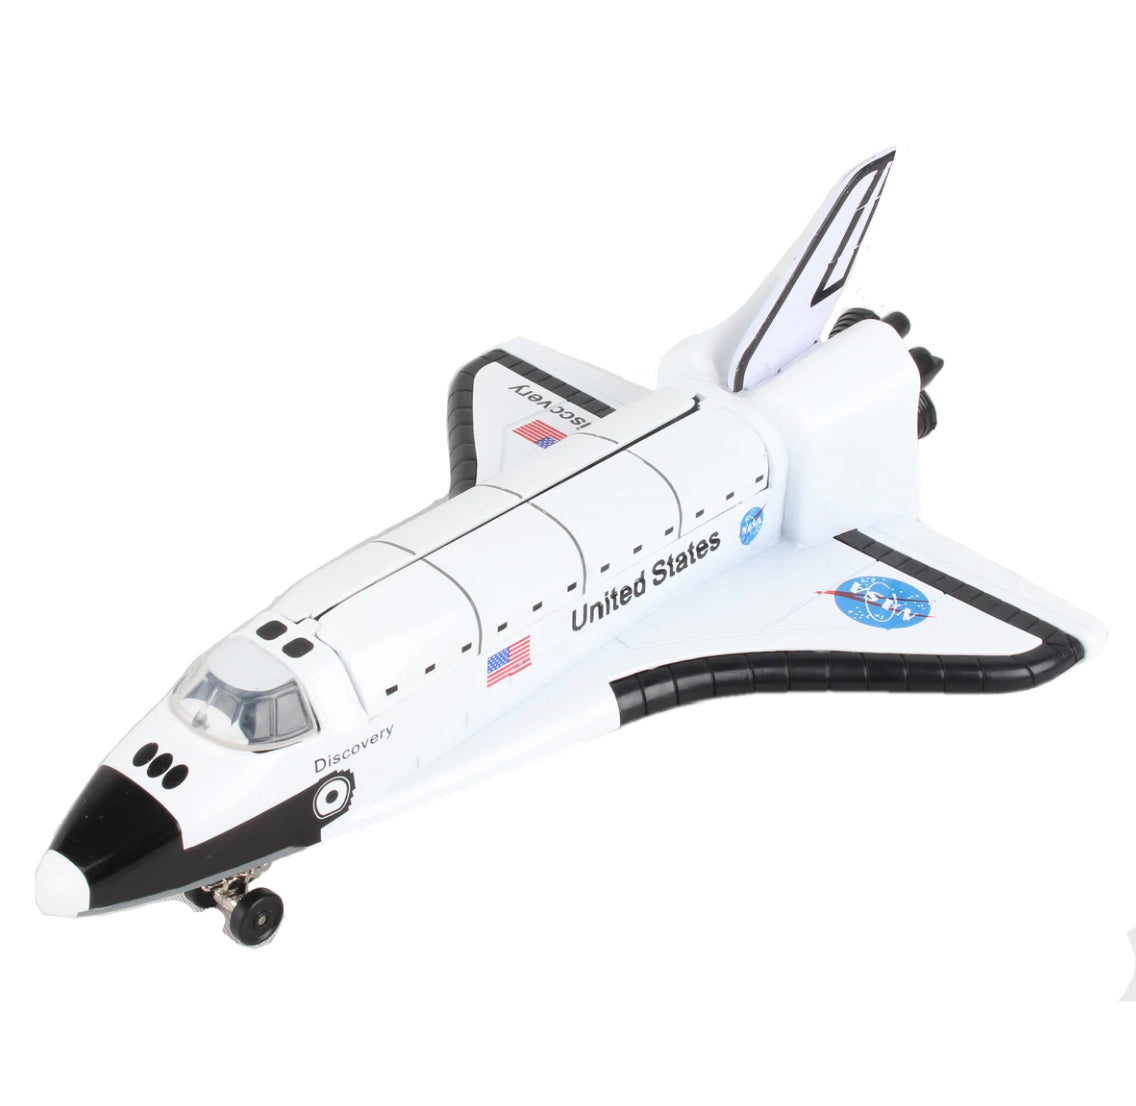 Space Shuttle Discovery Pullback Toy – 7.5" x 5.5"